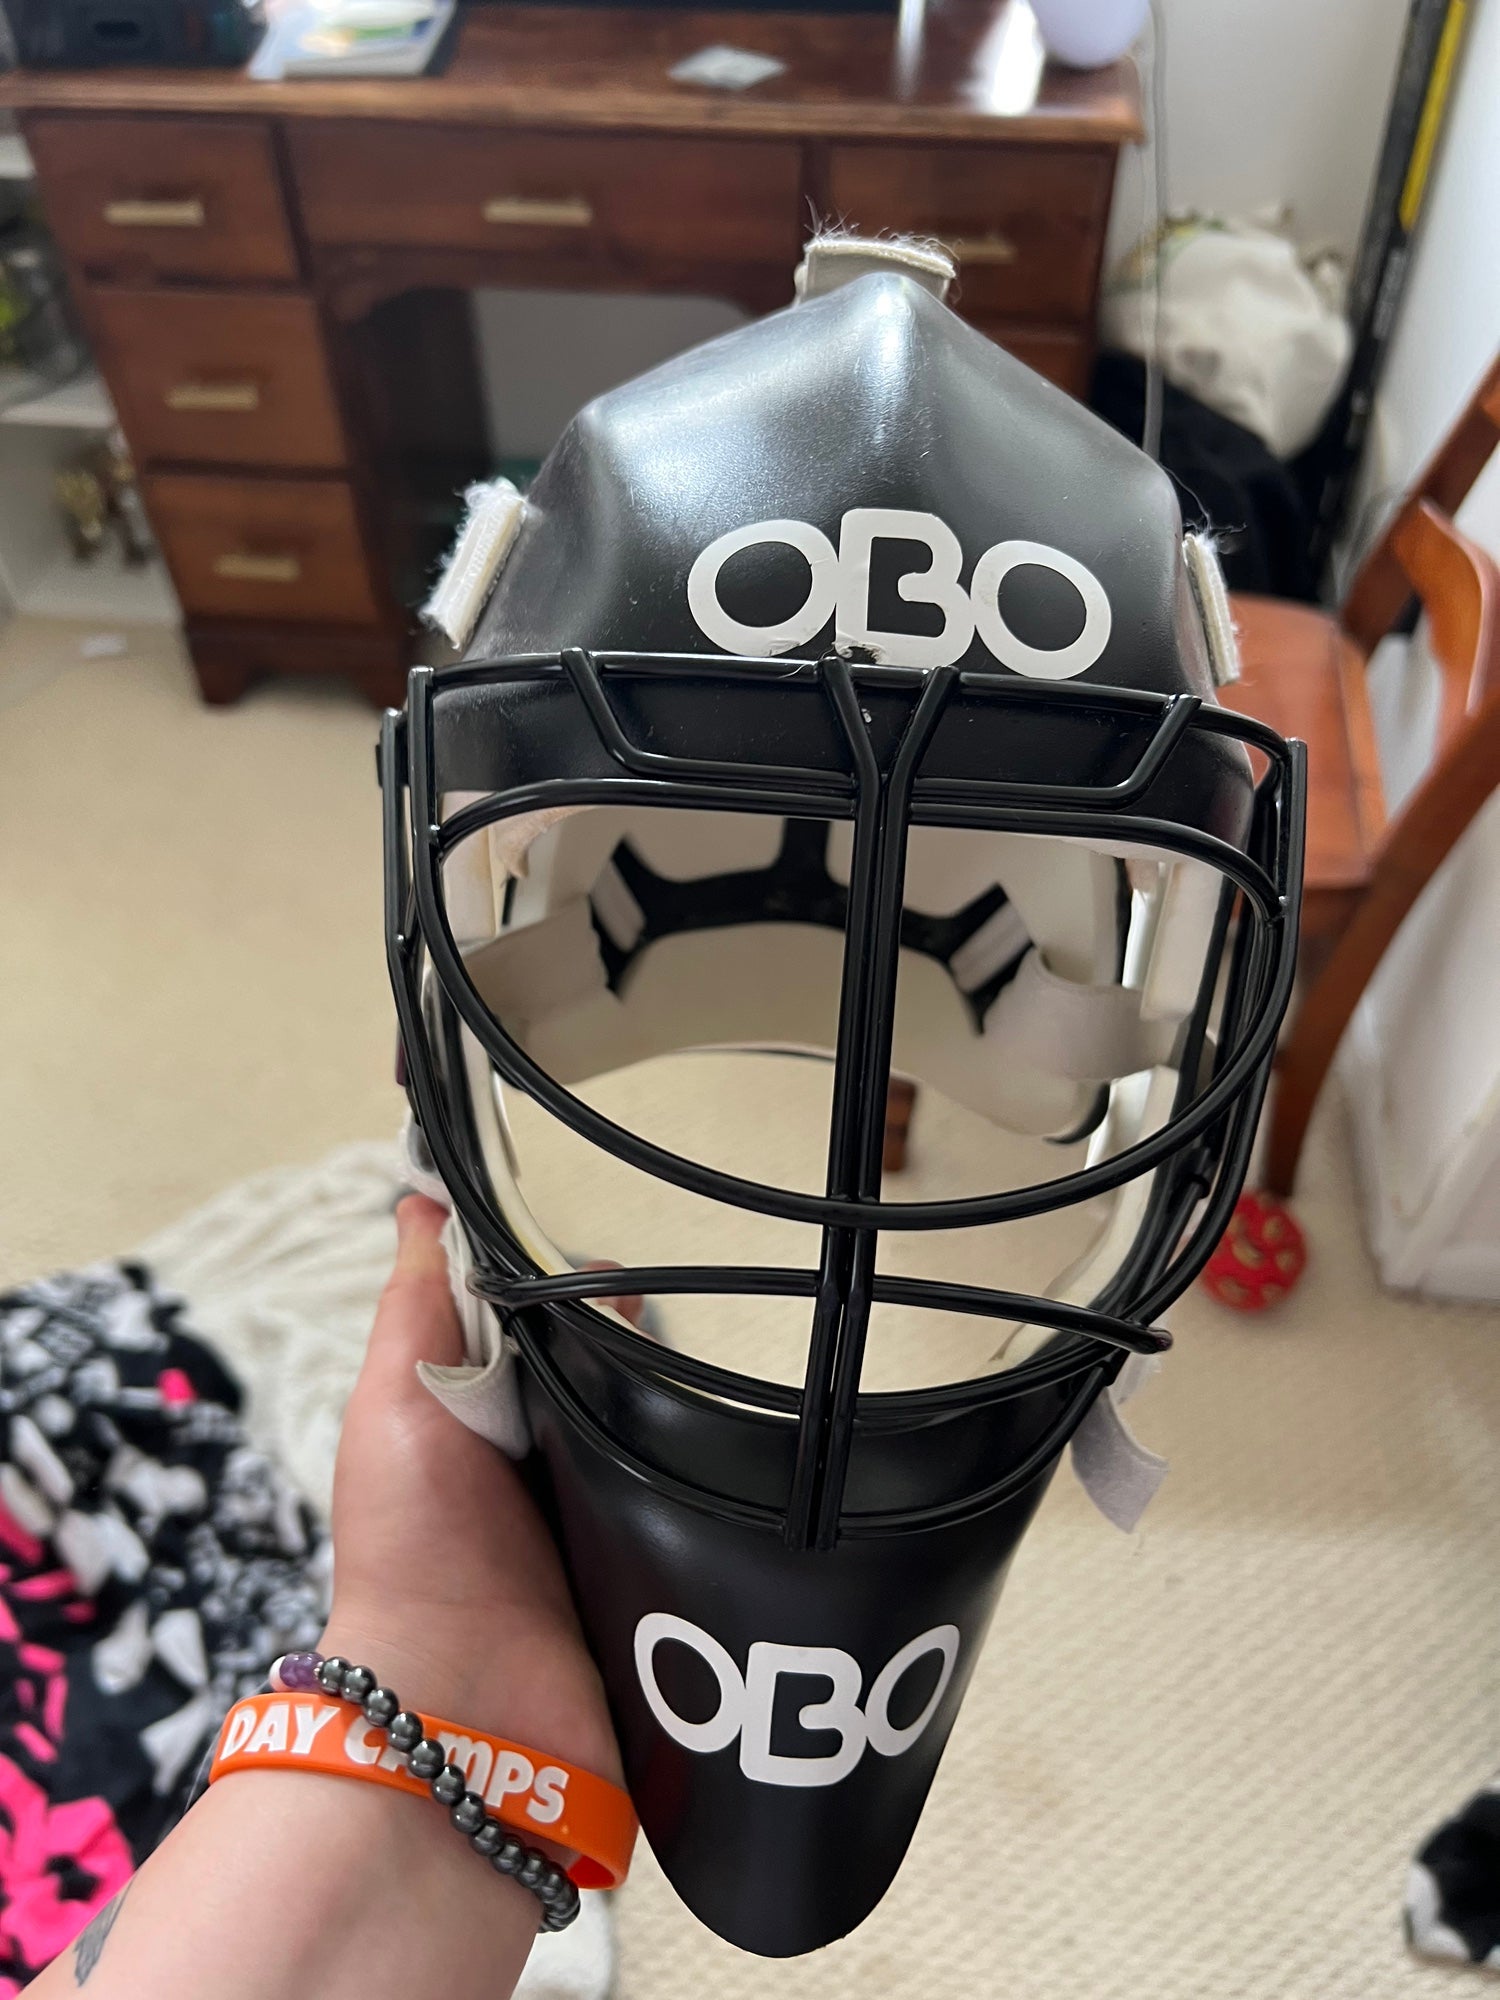 Found this OBO (field hockey) Mask for 5 bucks at thrift shop